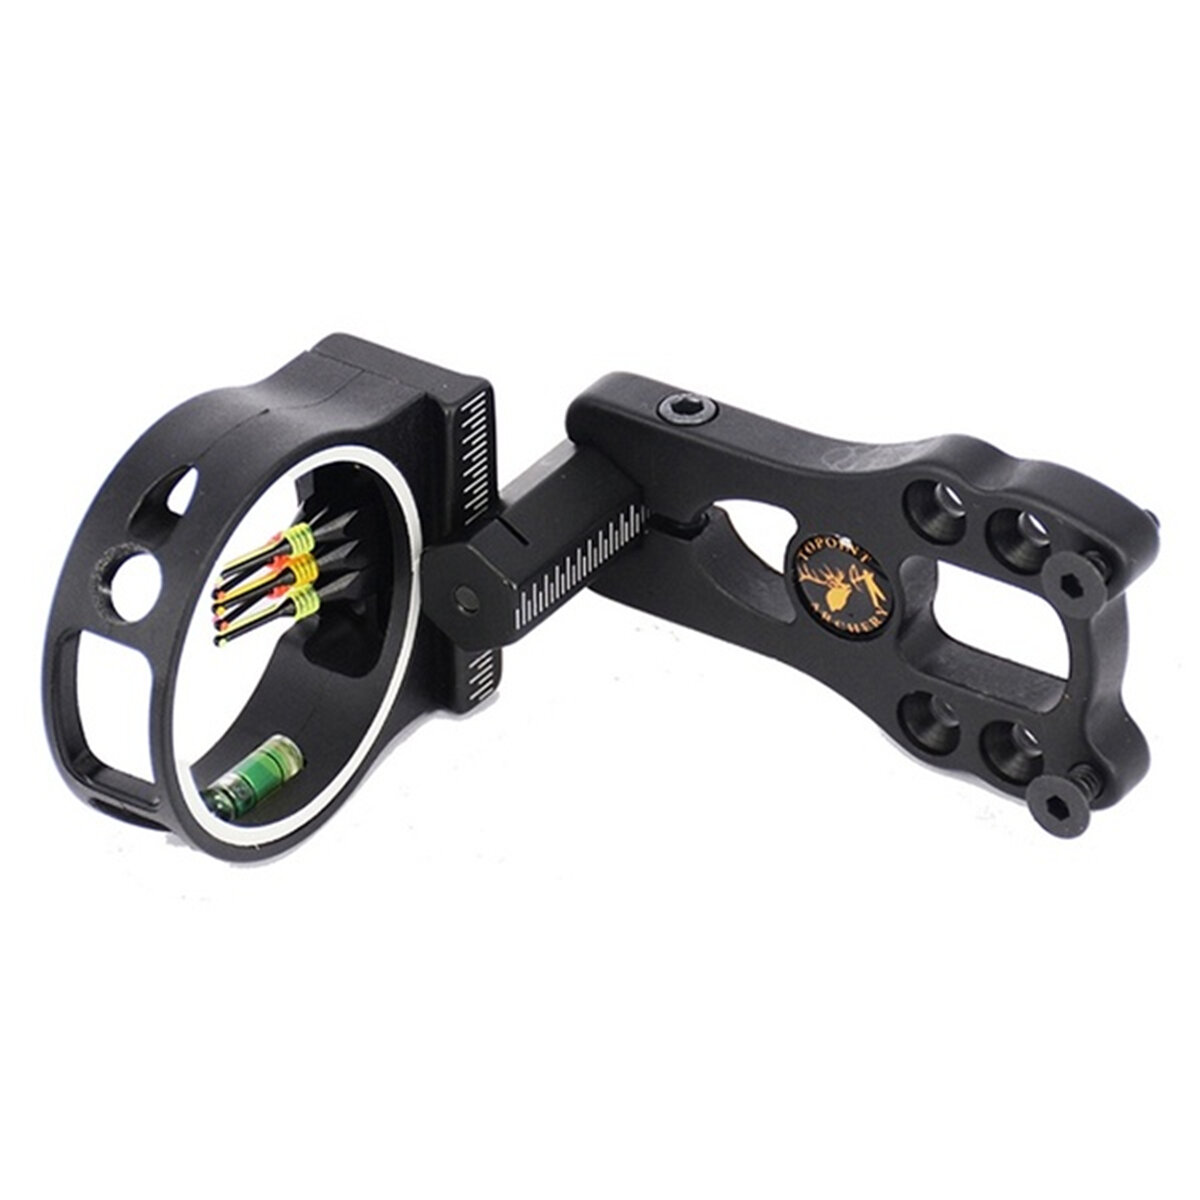 

Archery 5 Pin Bow Sight Arrow Rest Stabilizer Aluminum Fix Series Sight Hunting Shooting